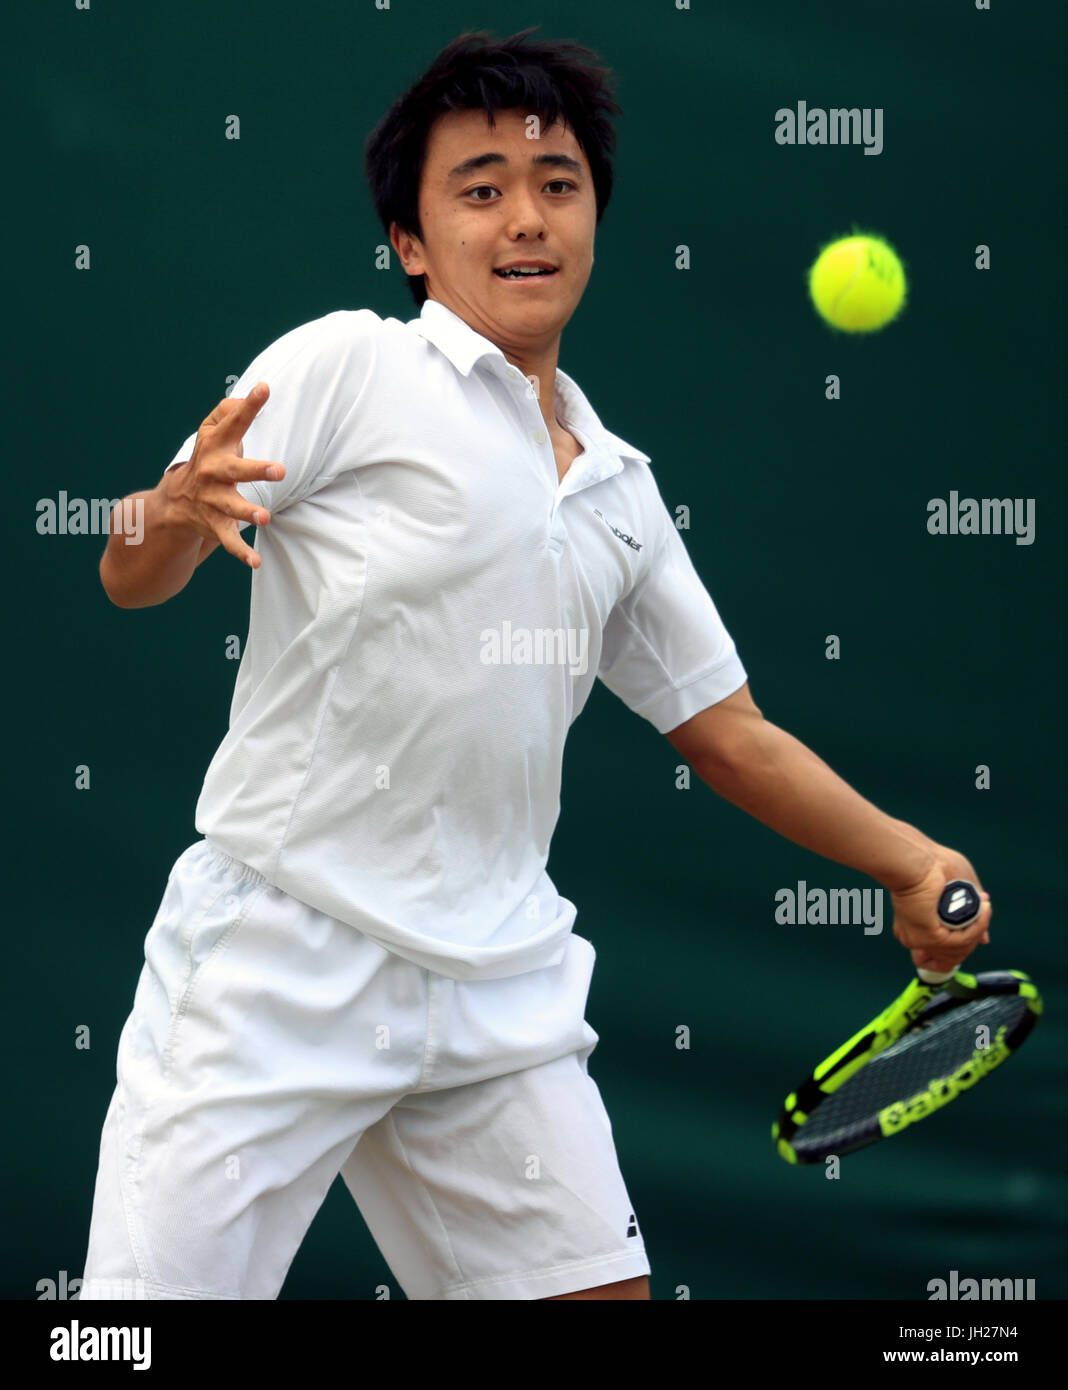 Yuta Shimizu in action in the boys singles on day Nine of the Wimbledon Championships at The All England Lawn Tennis and Croquet Club, Wimbledon